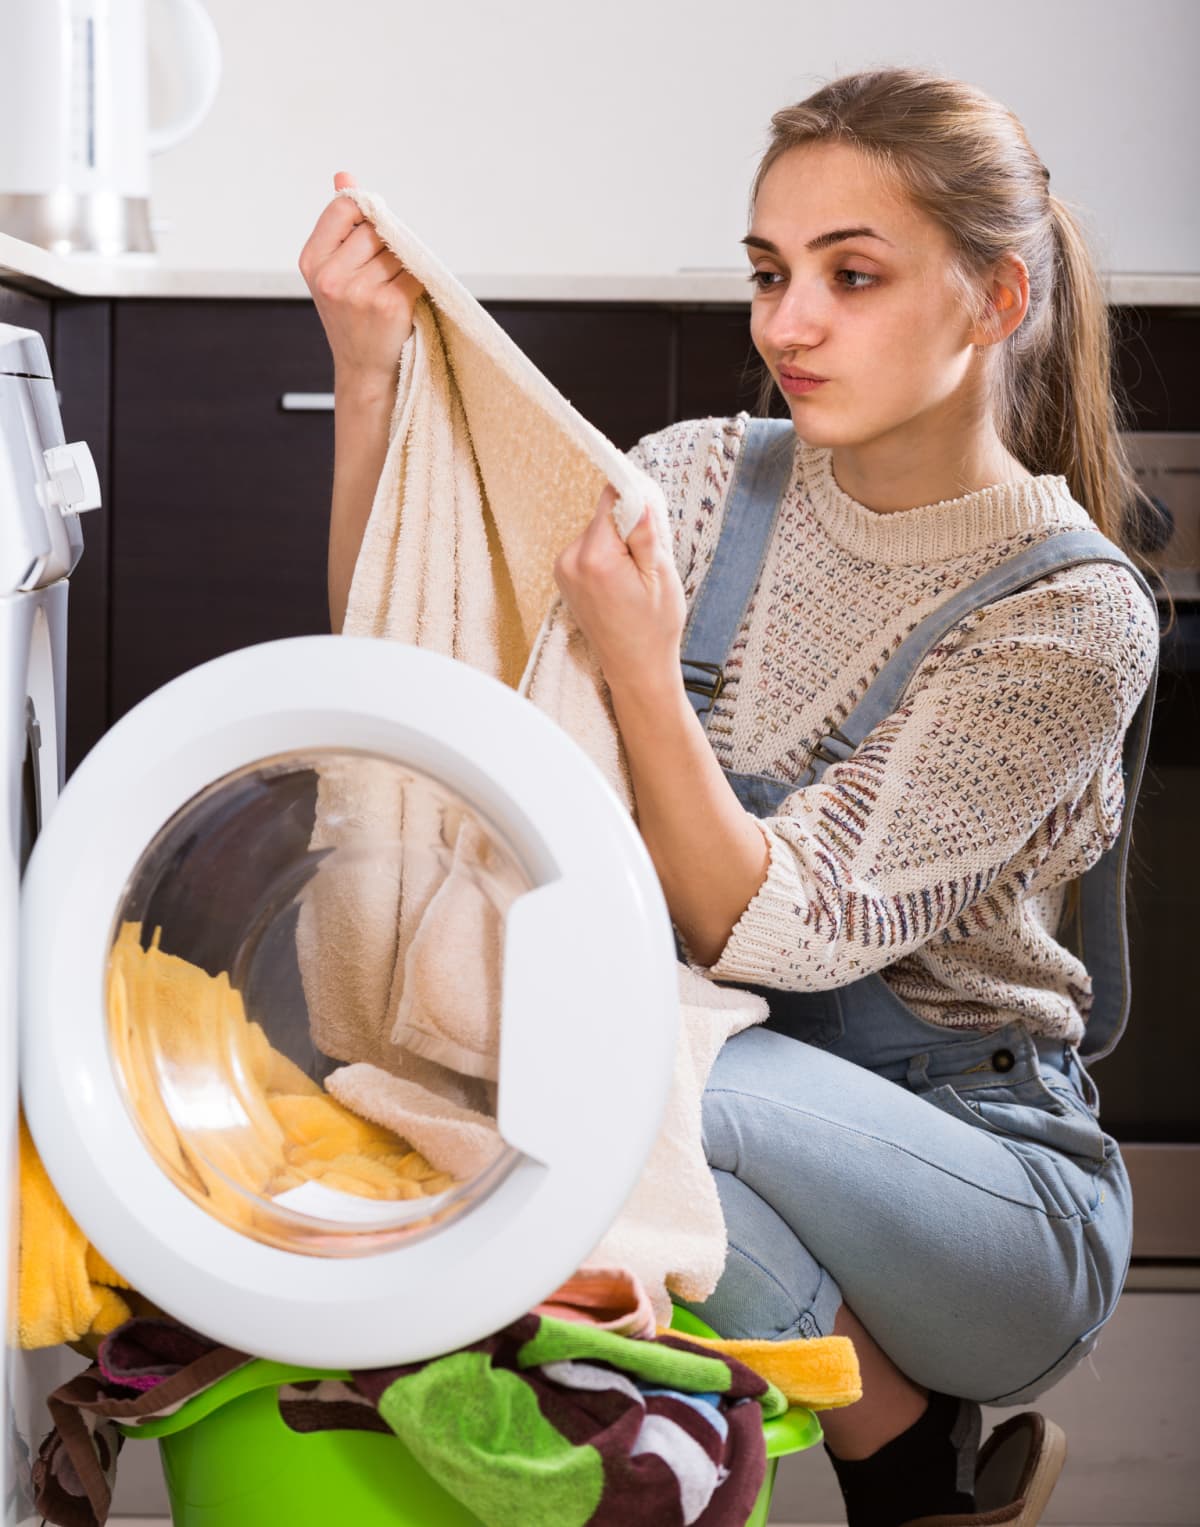 Woman taking dirty clothes out of washer